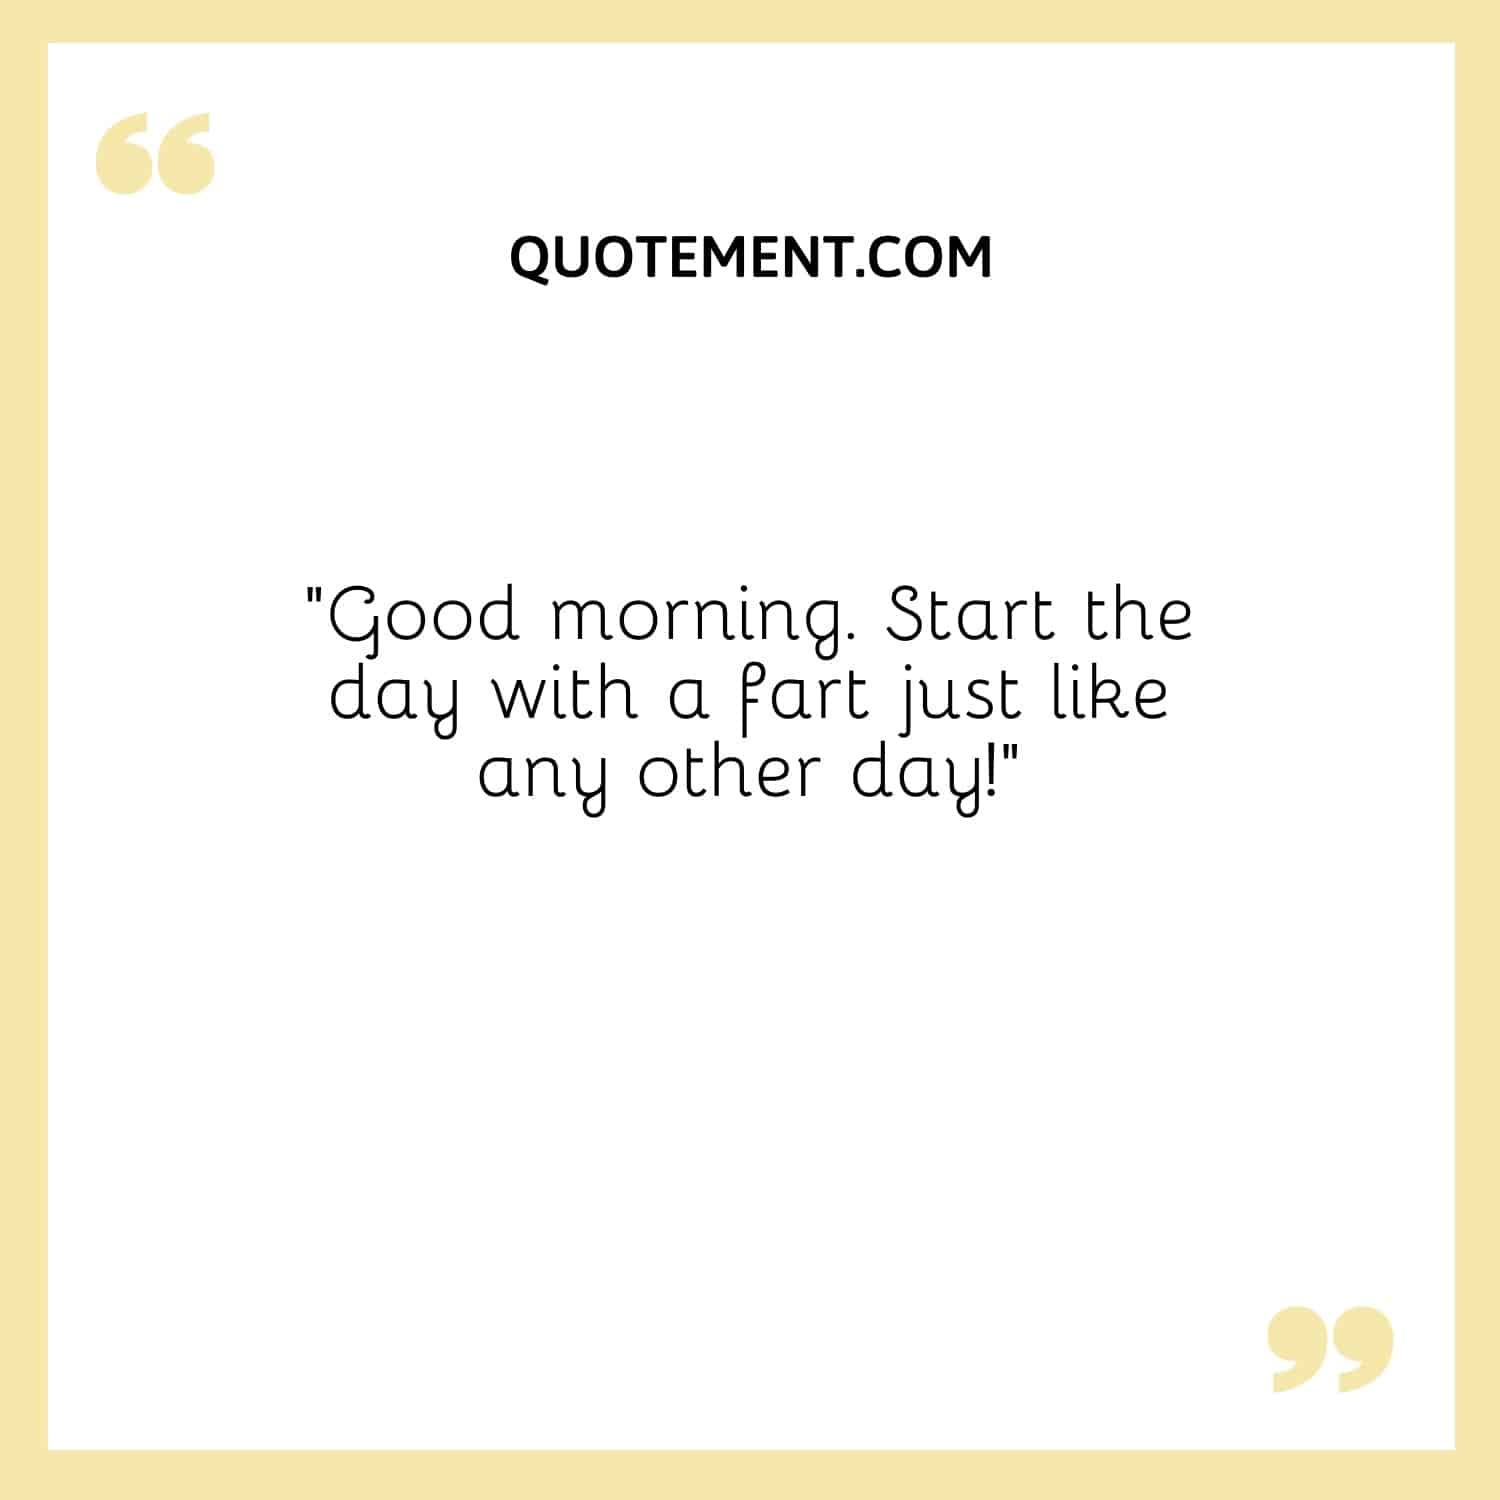 Start the day with a fart just like any other day